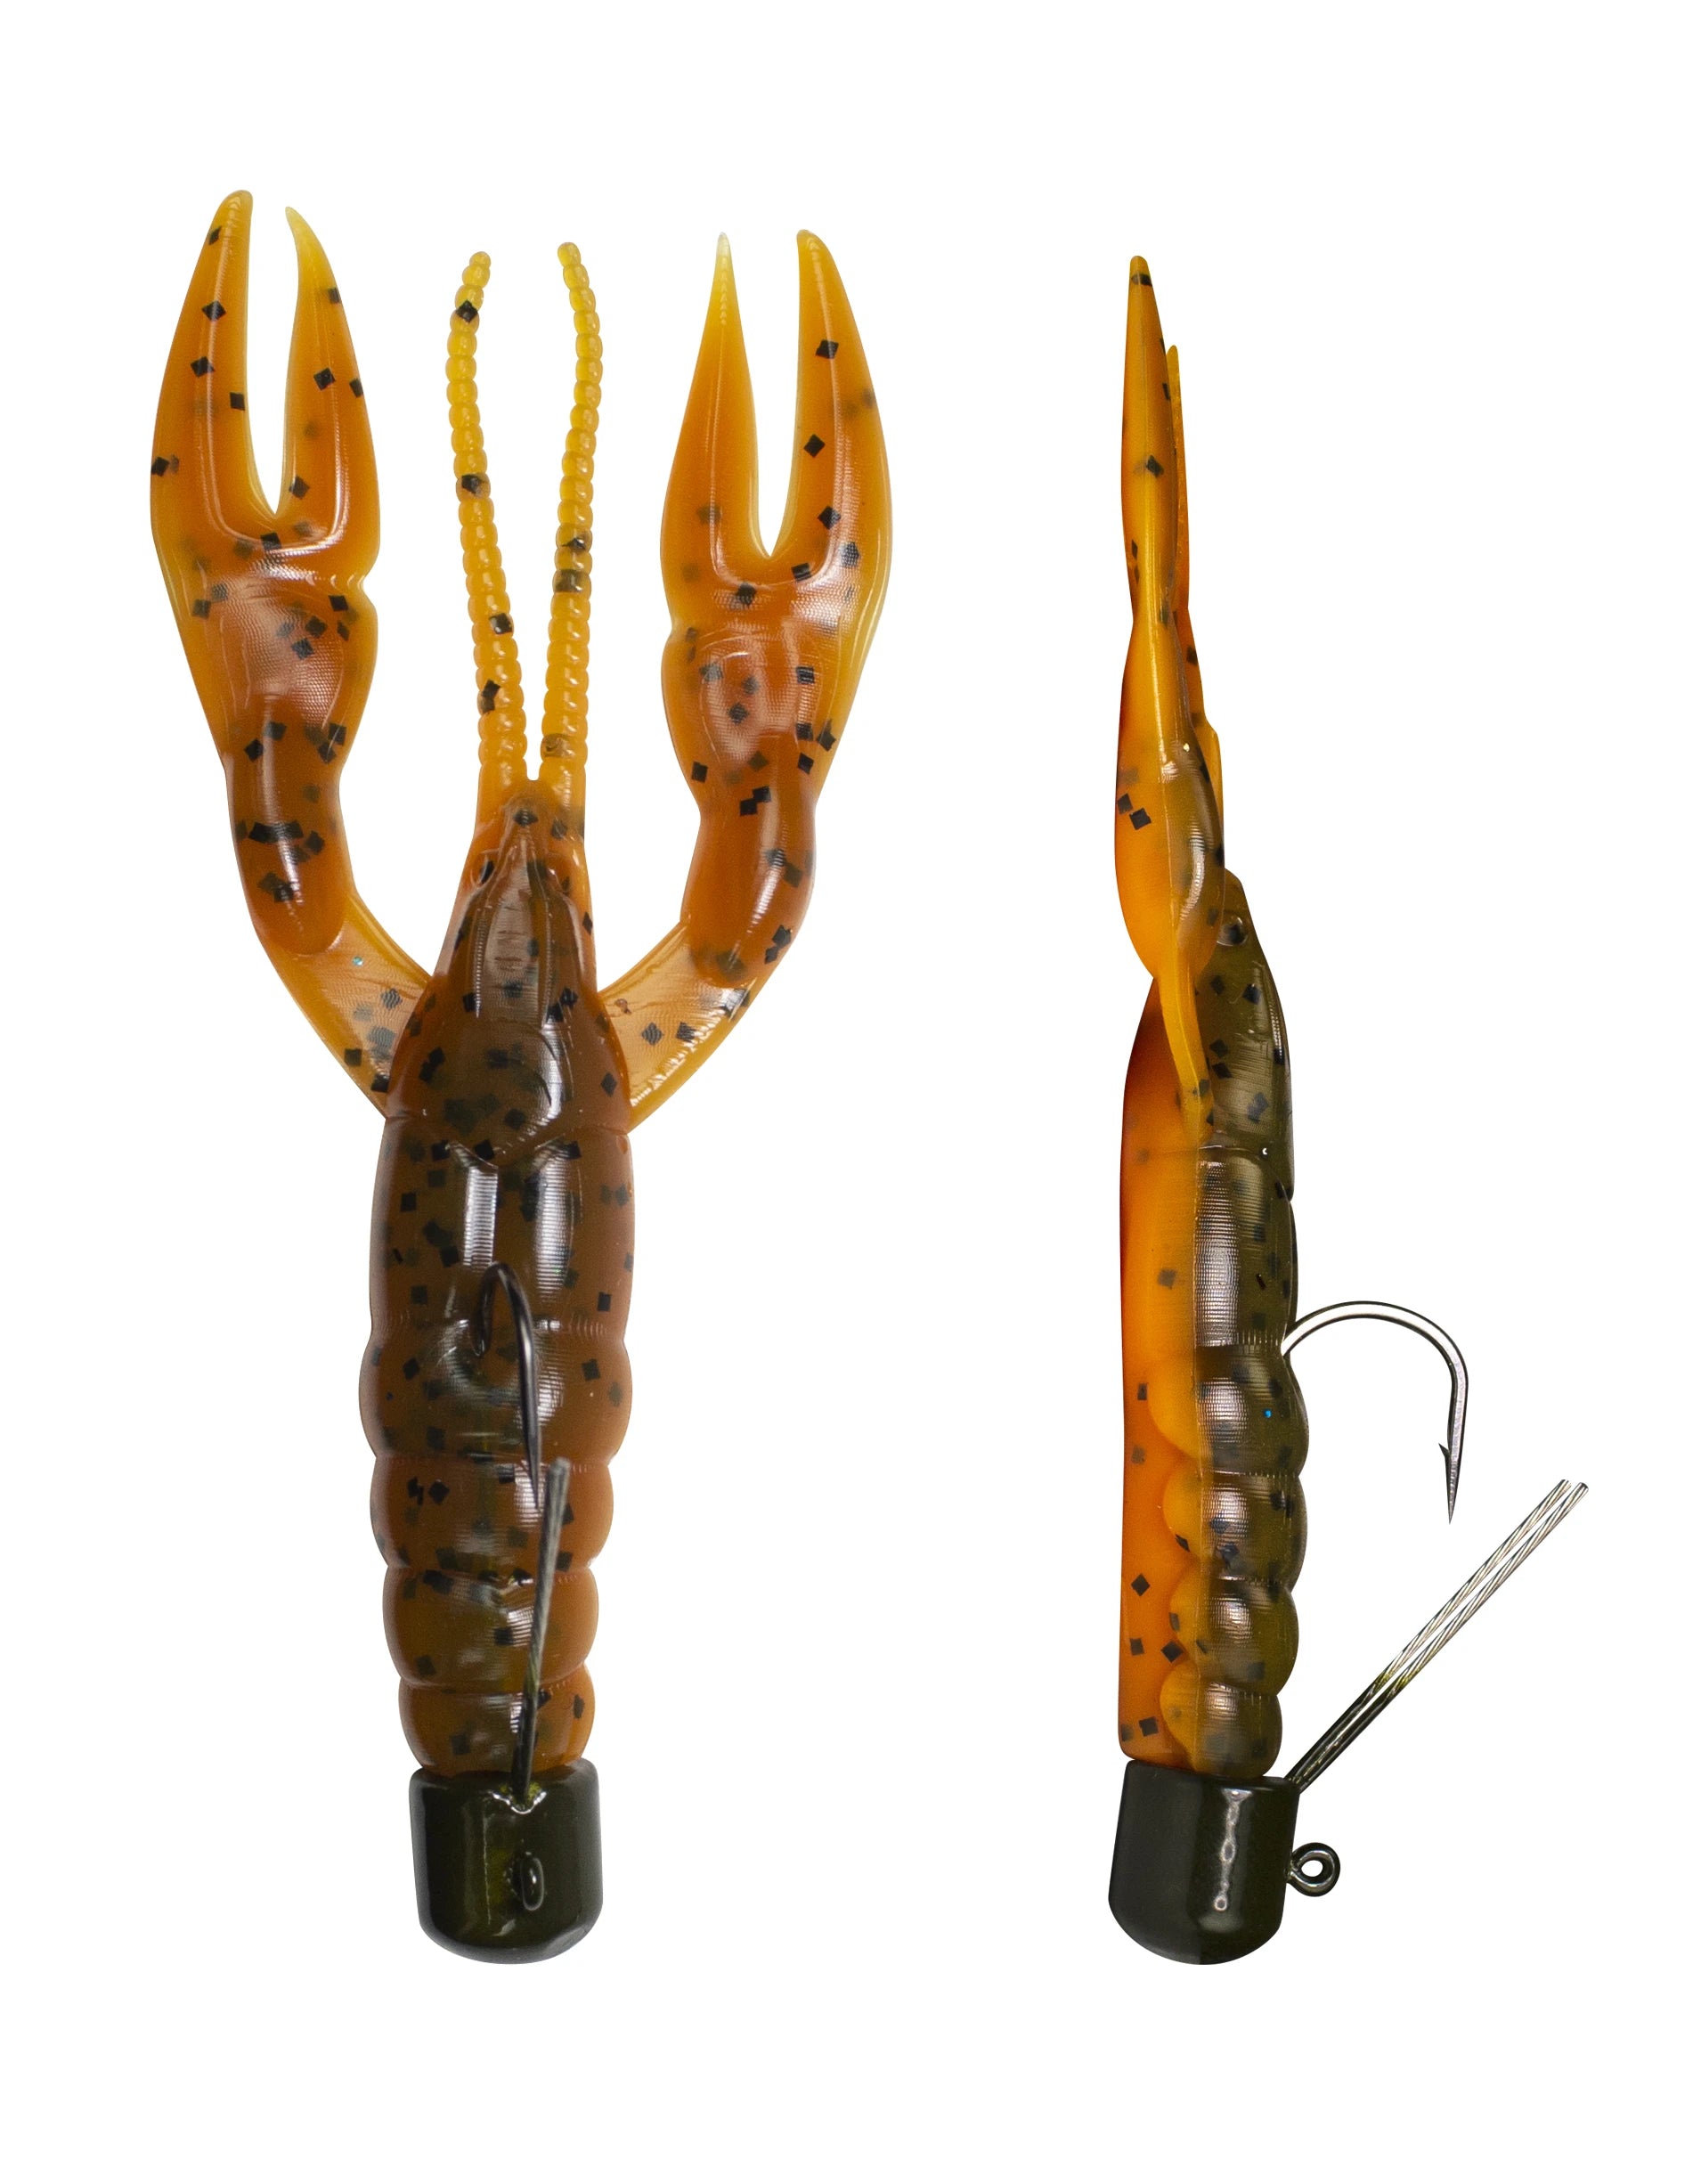 Bam Baits 9-Piece Pre-Rigged Ned Rig Kit - Finesse Fishing